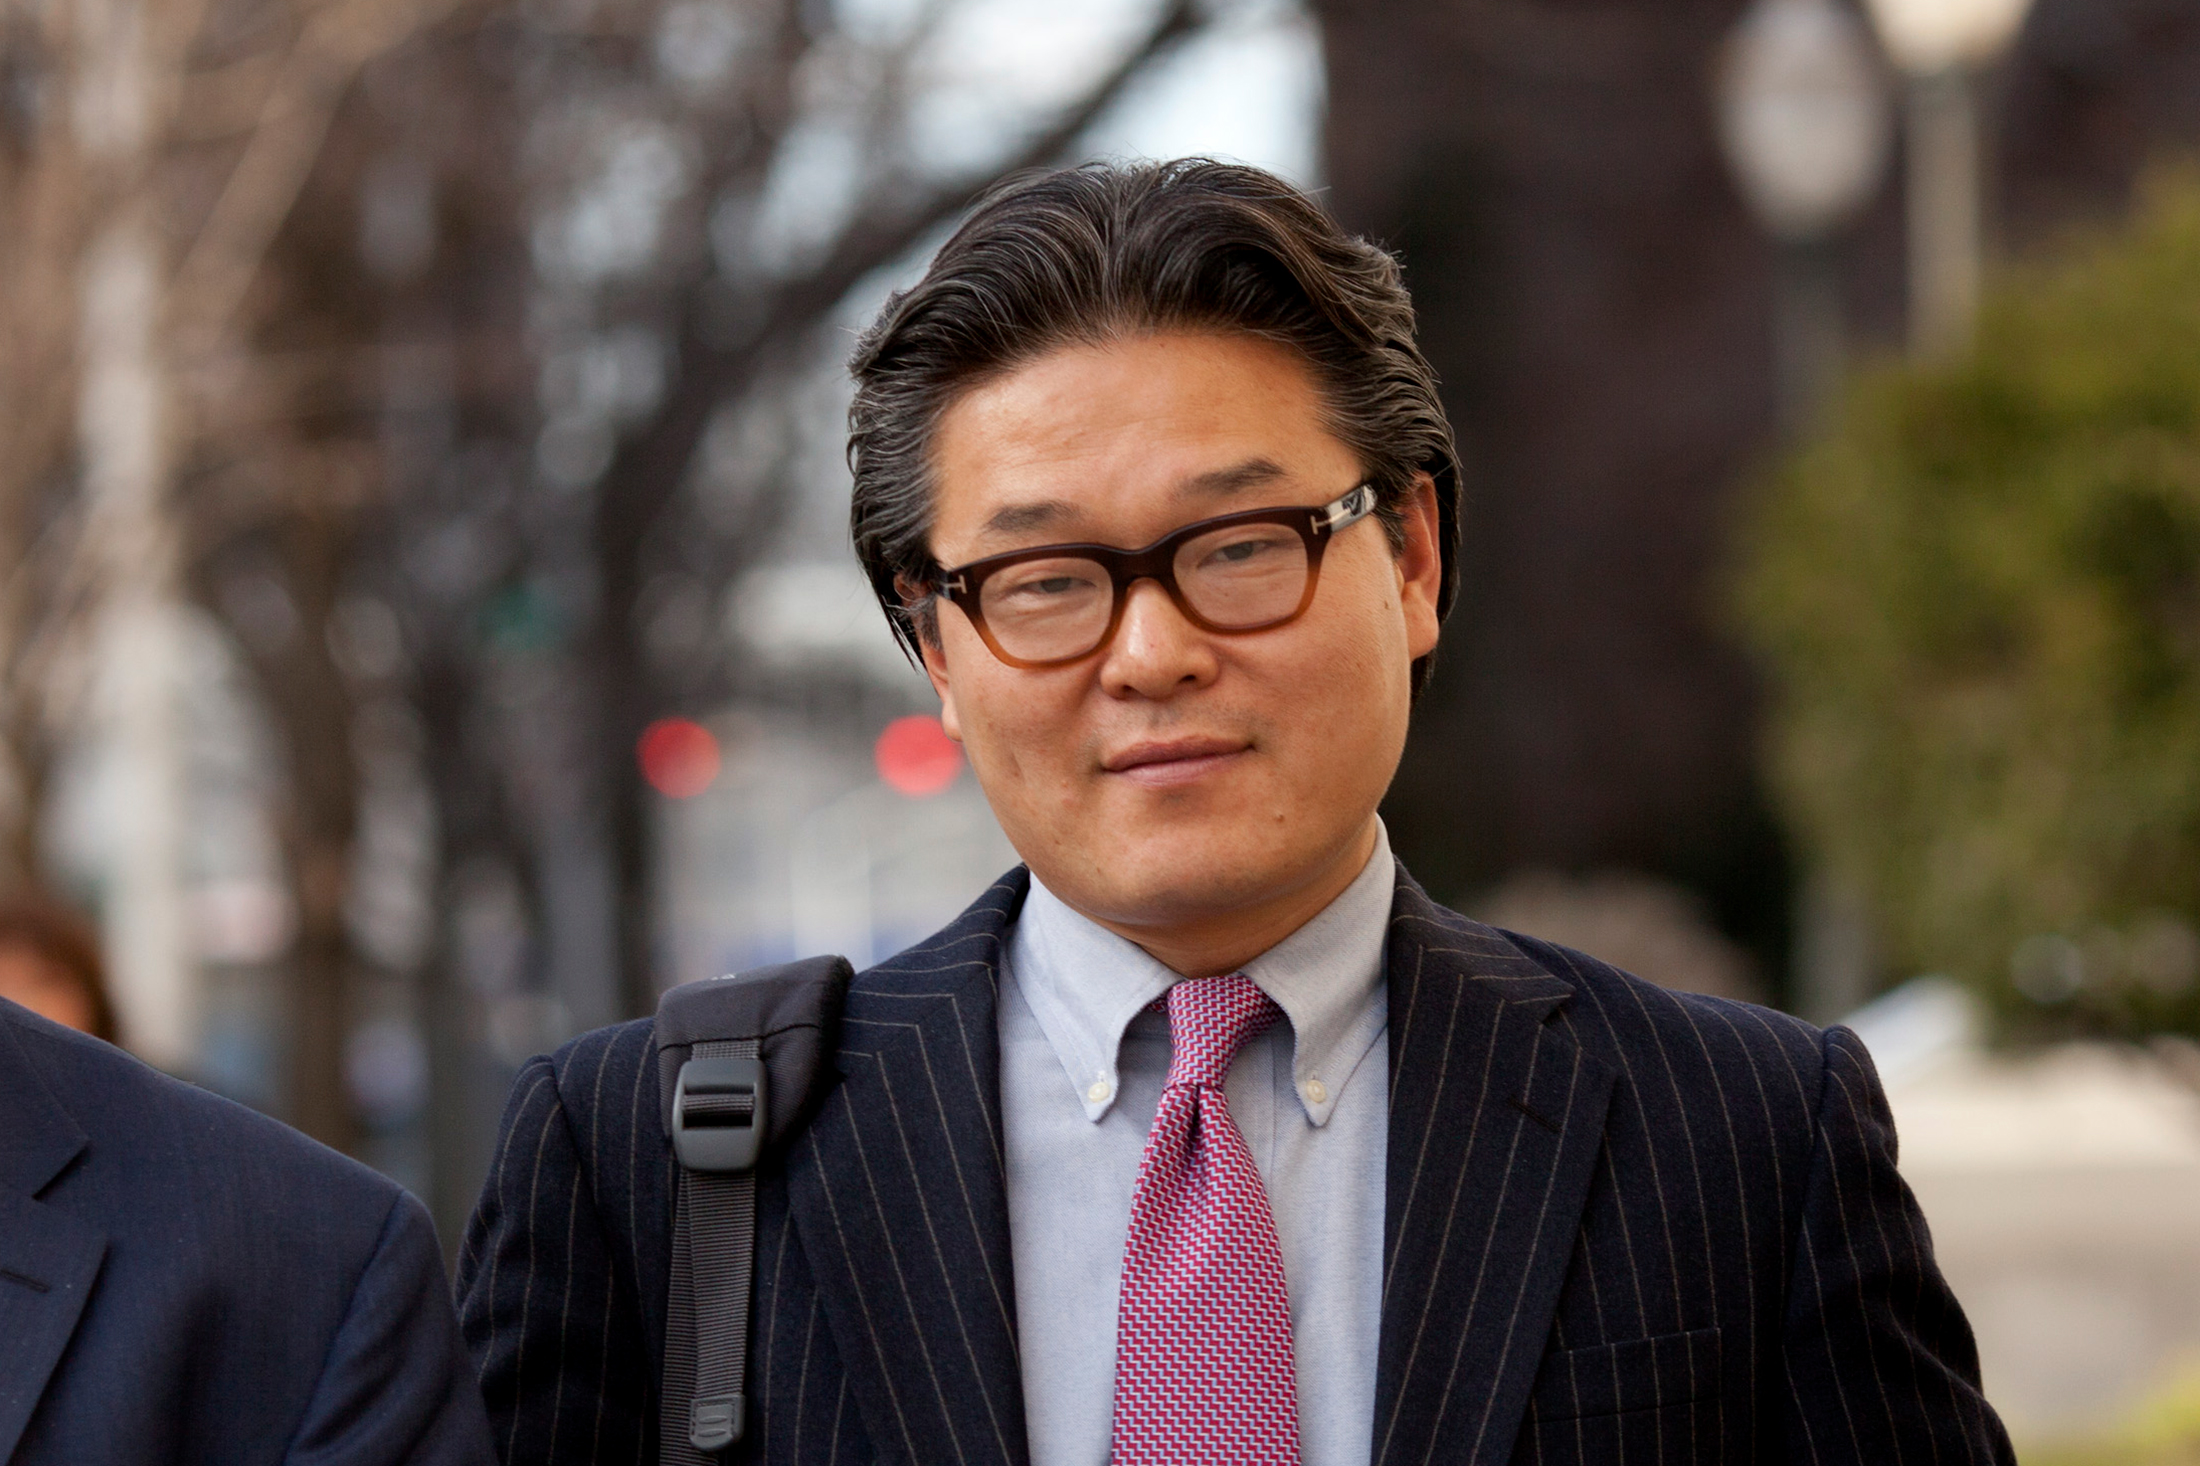 Archegos founder Bill Hwang indicted in fraud case